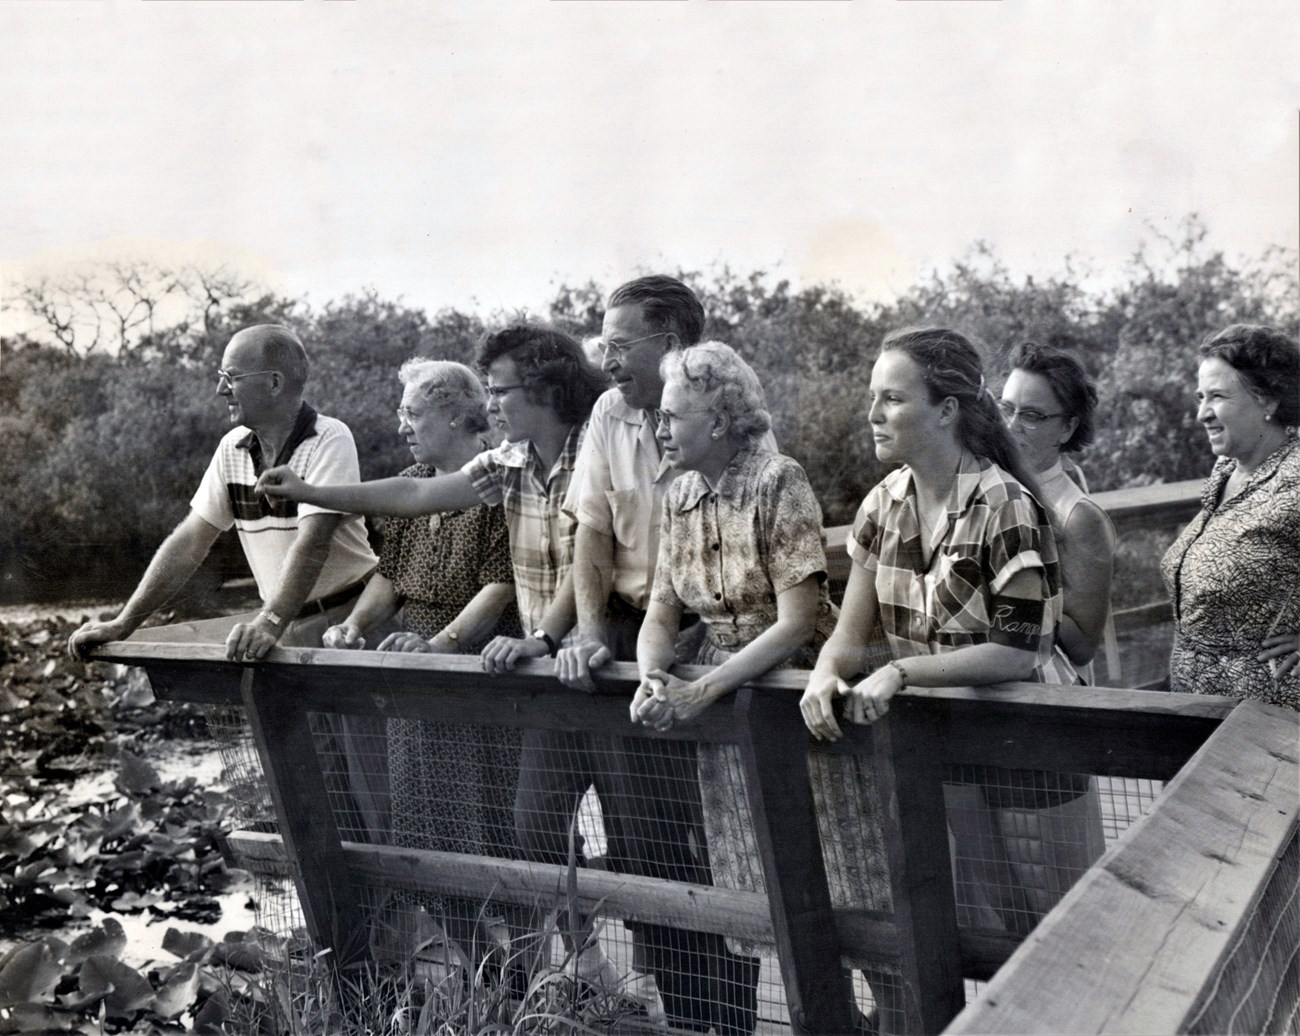 Eight people stand on a boardwalk look out over water. A girl points towards something off camera. One girl wears a ranger aide armband.